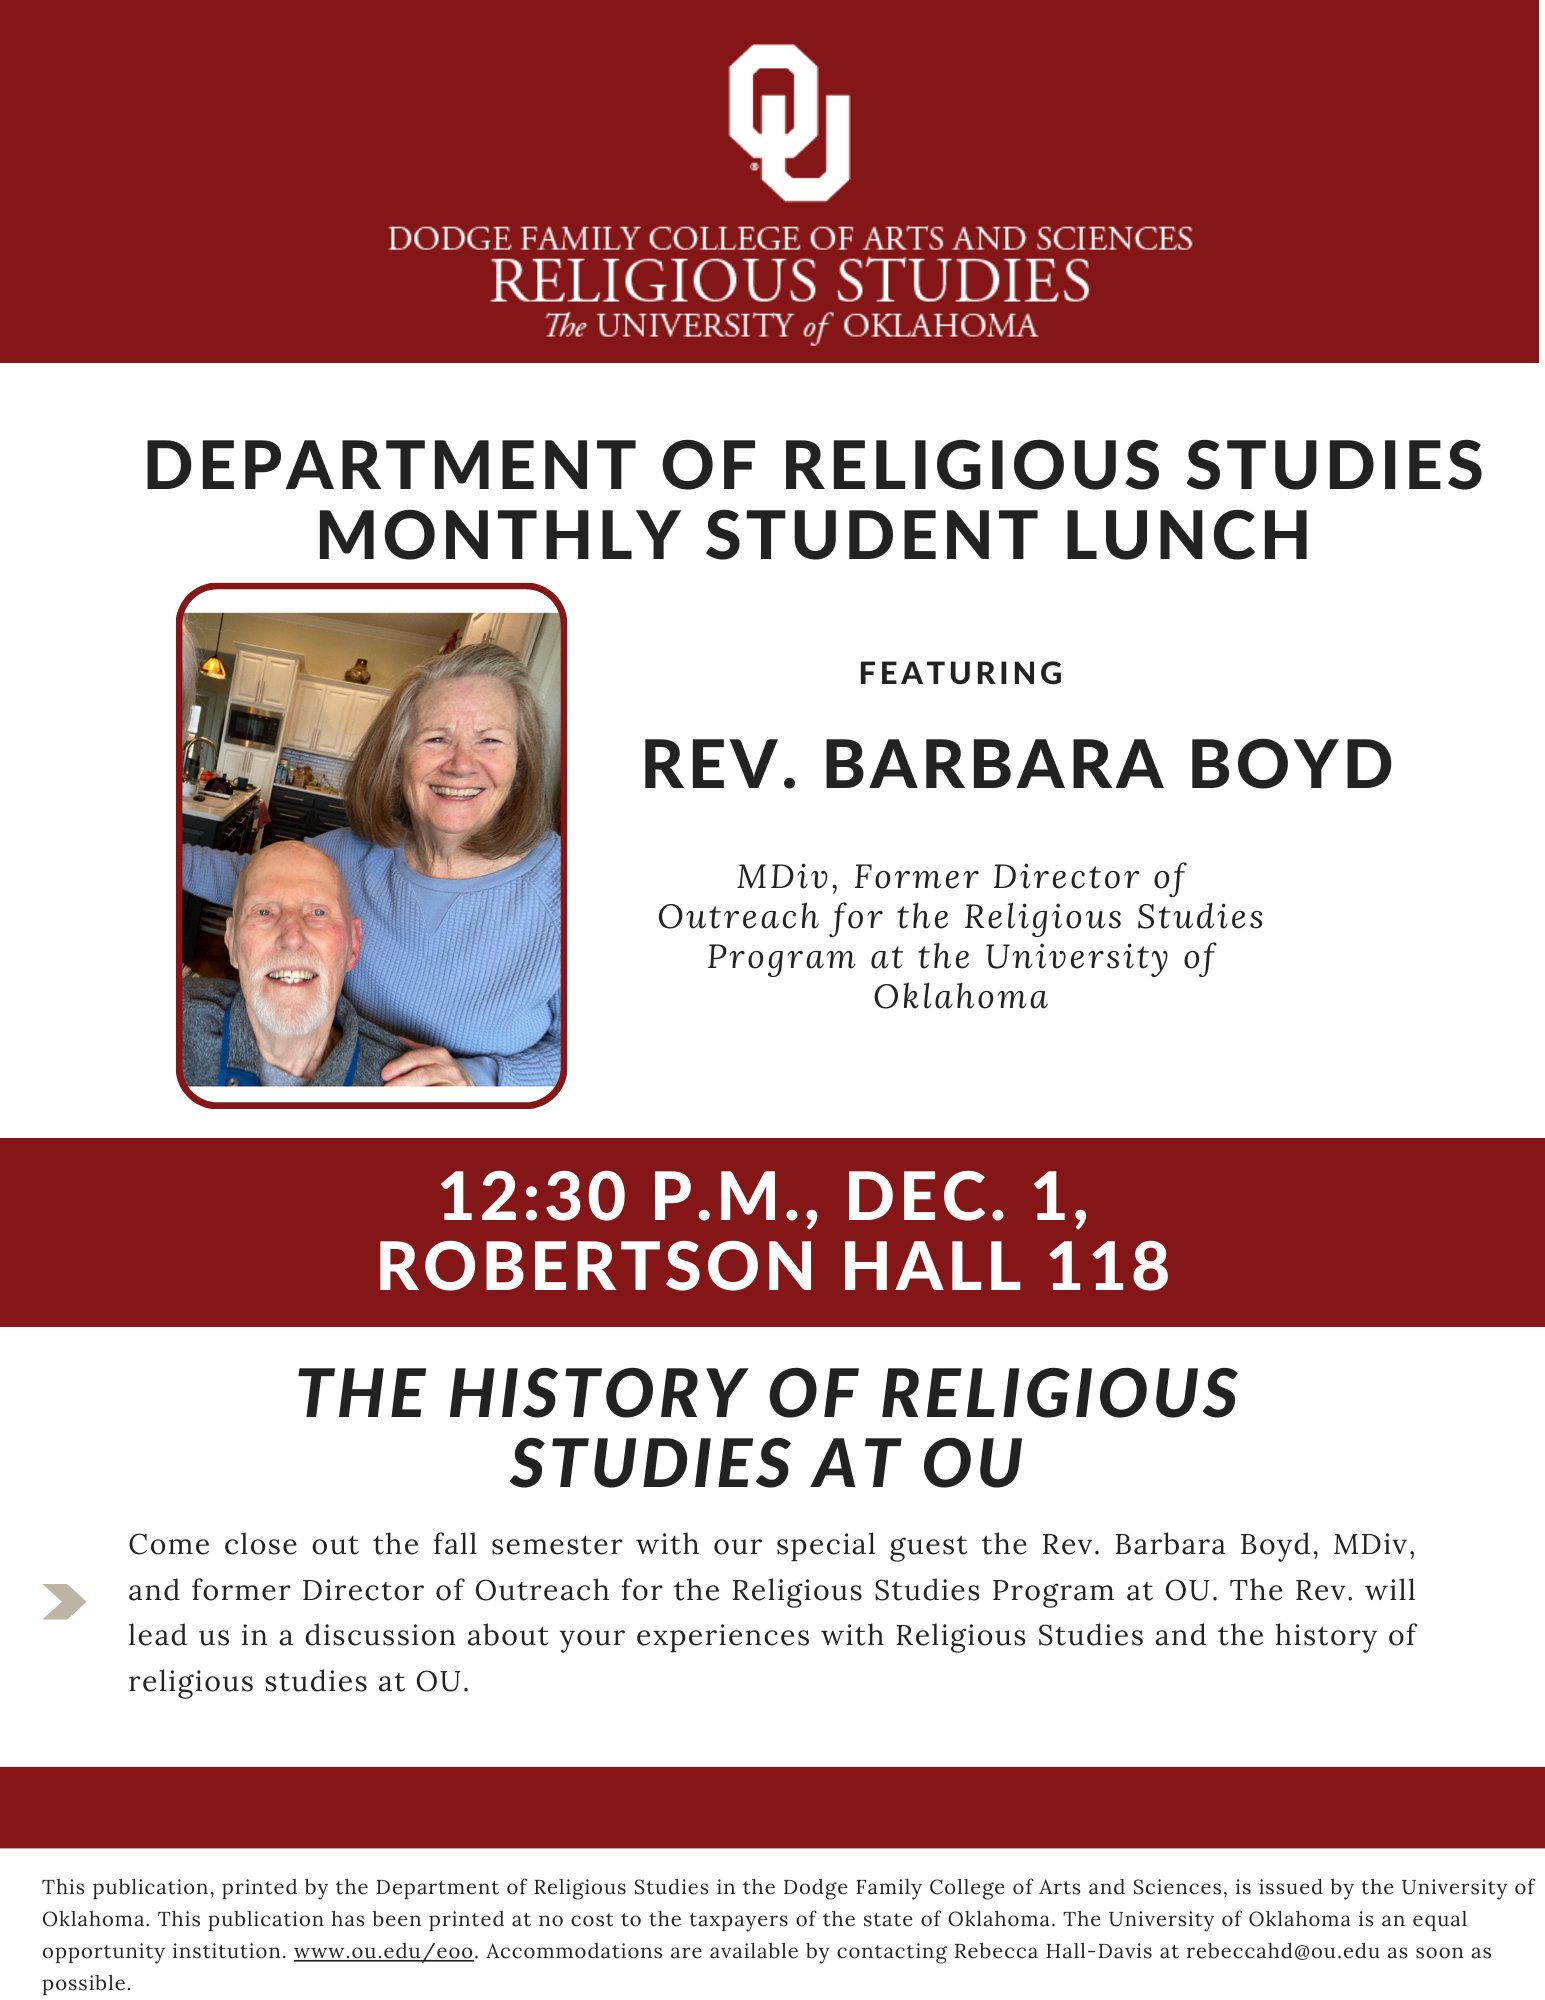 RELS students, RELS-curious students, and friends: Come close out the fall semester with our special guest the Rev. Barbara Boyd, MDiv, former Director of Outreach for the Religious Studies Program at OU. The Rev. will lead us in a discussion about your experiences with Religious Studies and the history of religious studies at OU.  Pizza and drinks will be provided.    Fri., Dec. 1  Noon  Robertson 118 (RELS Conference Room)